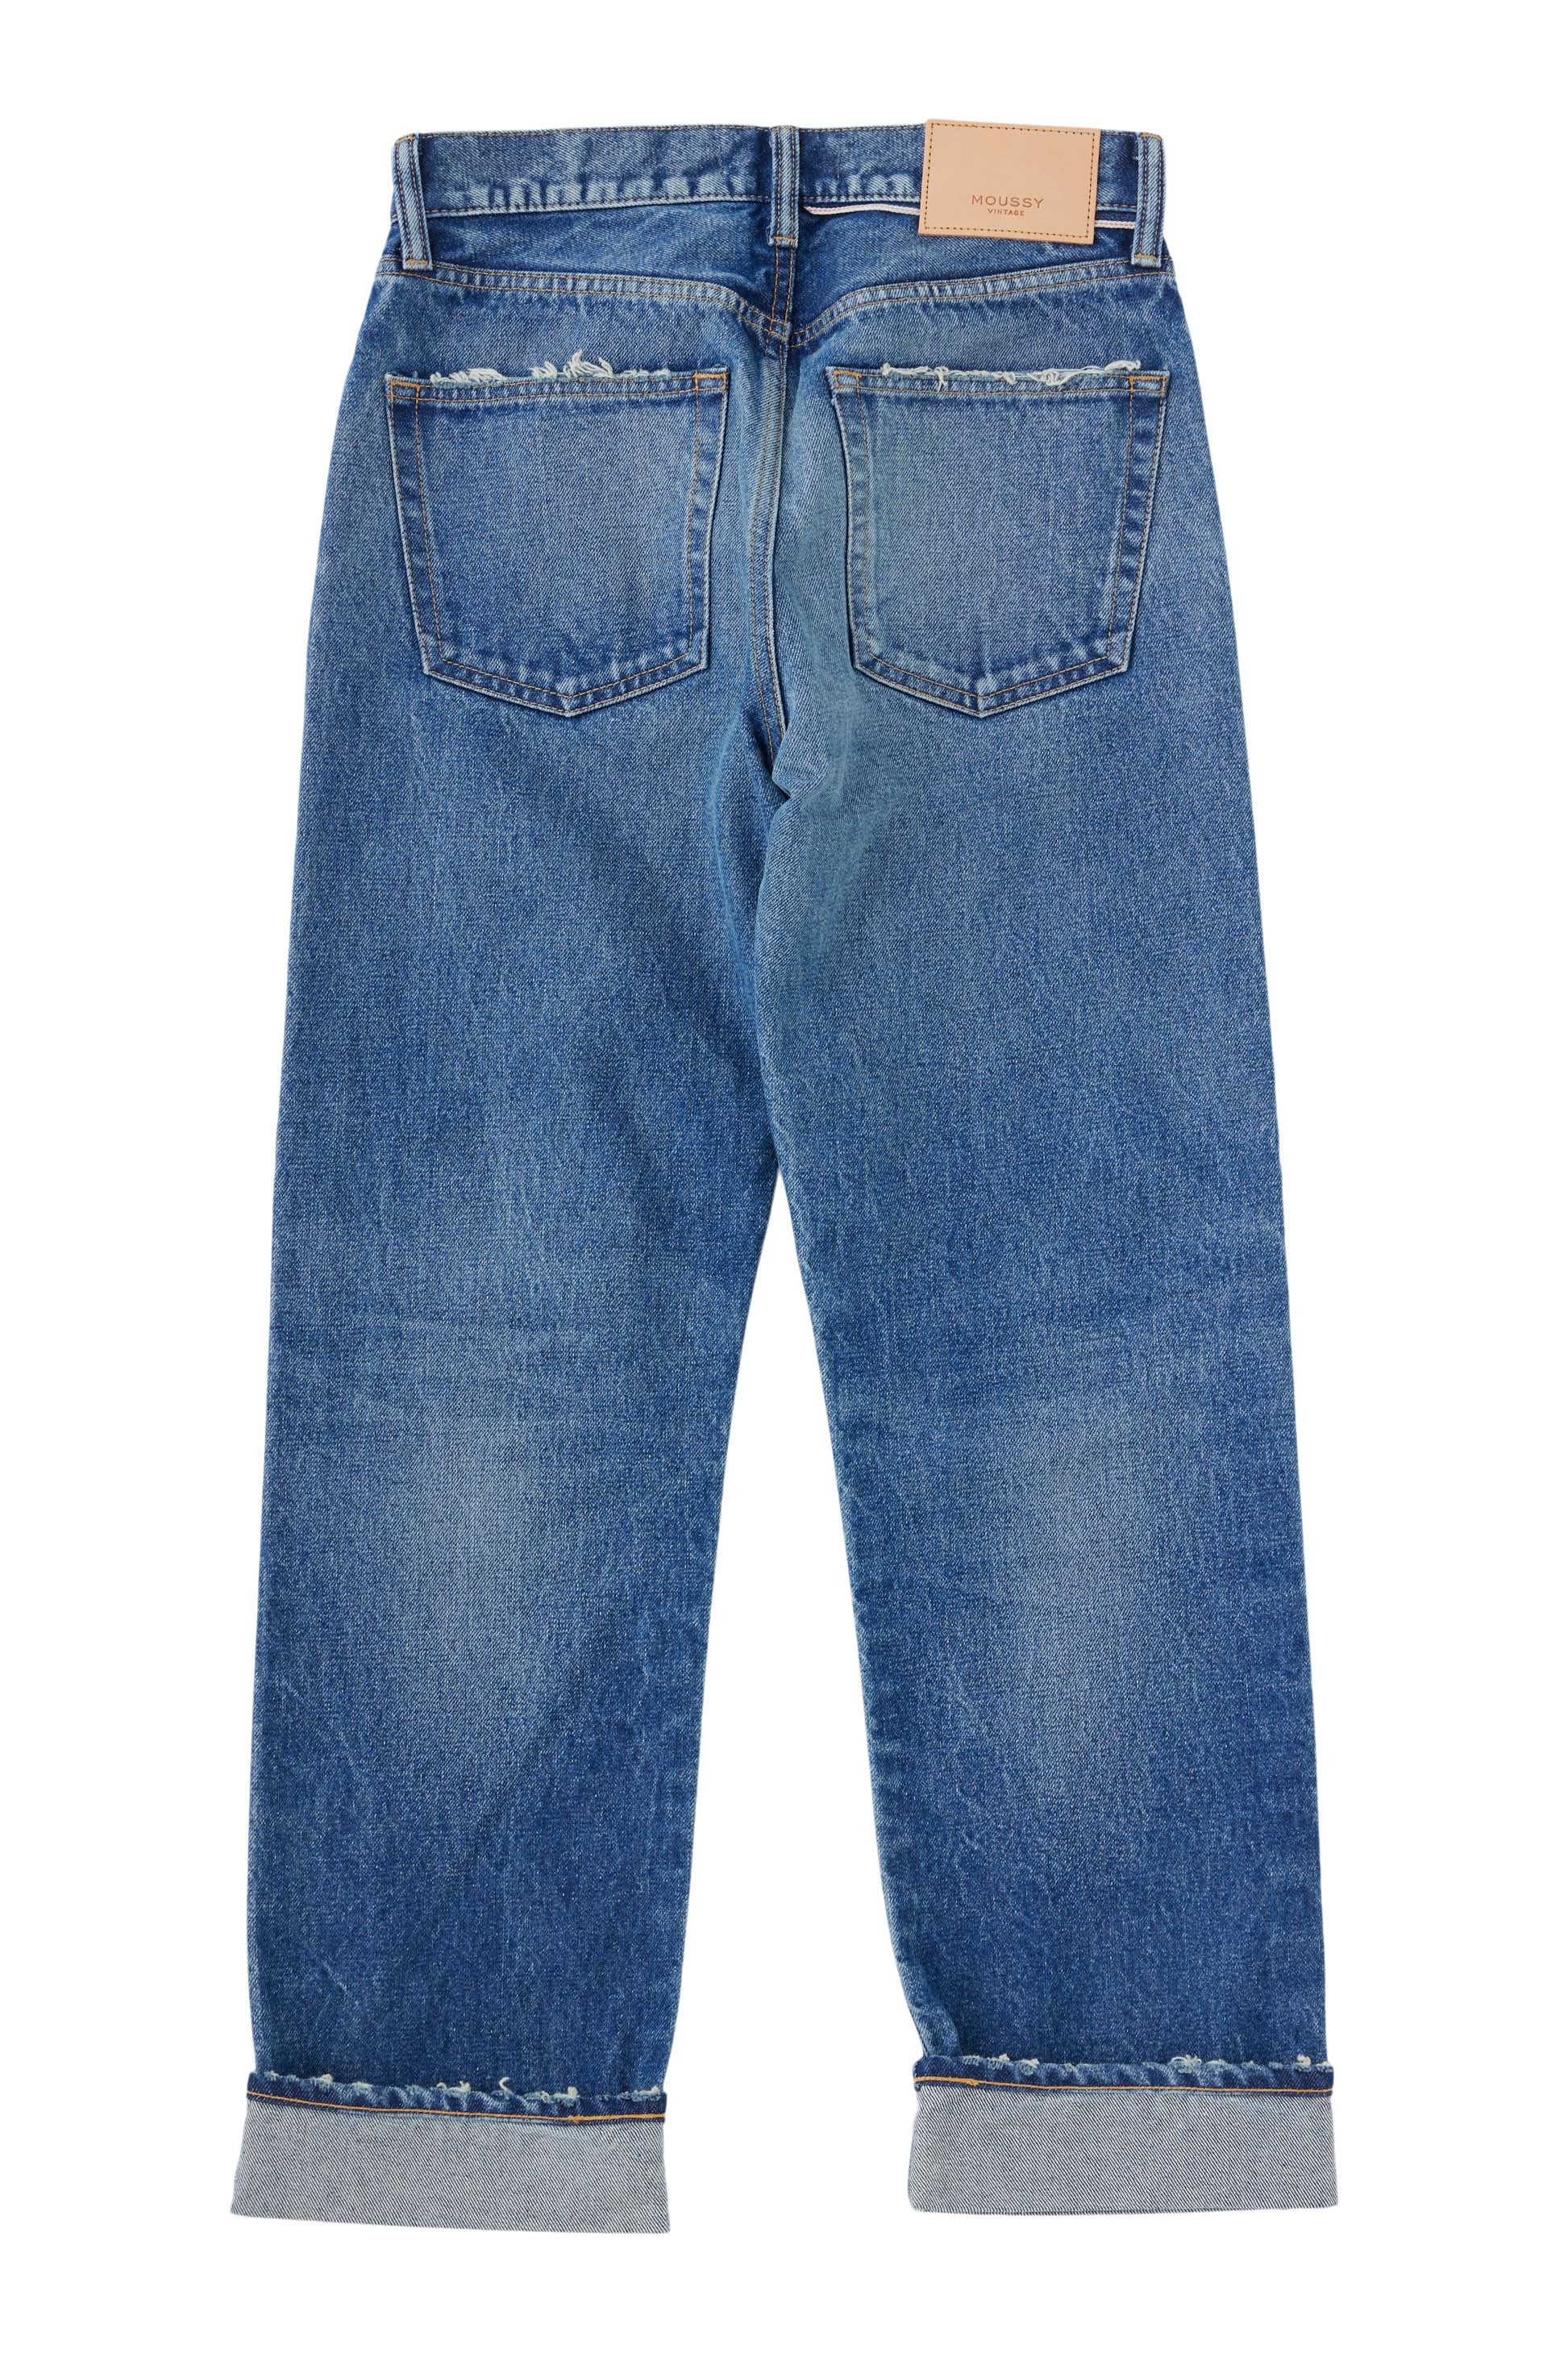 Moussy Denim Foxwoods Straight Jeans in Blue